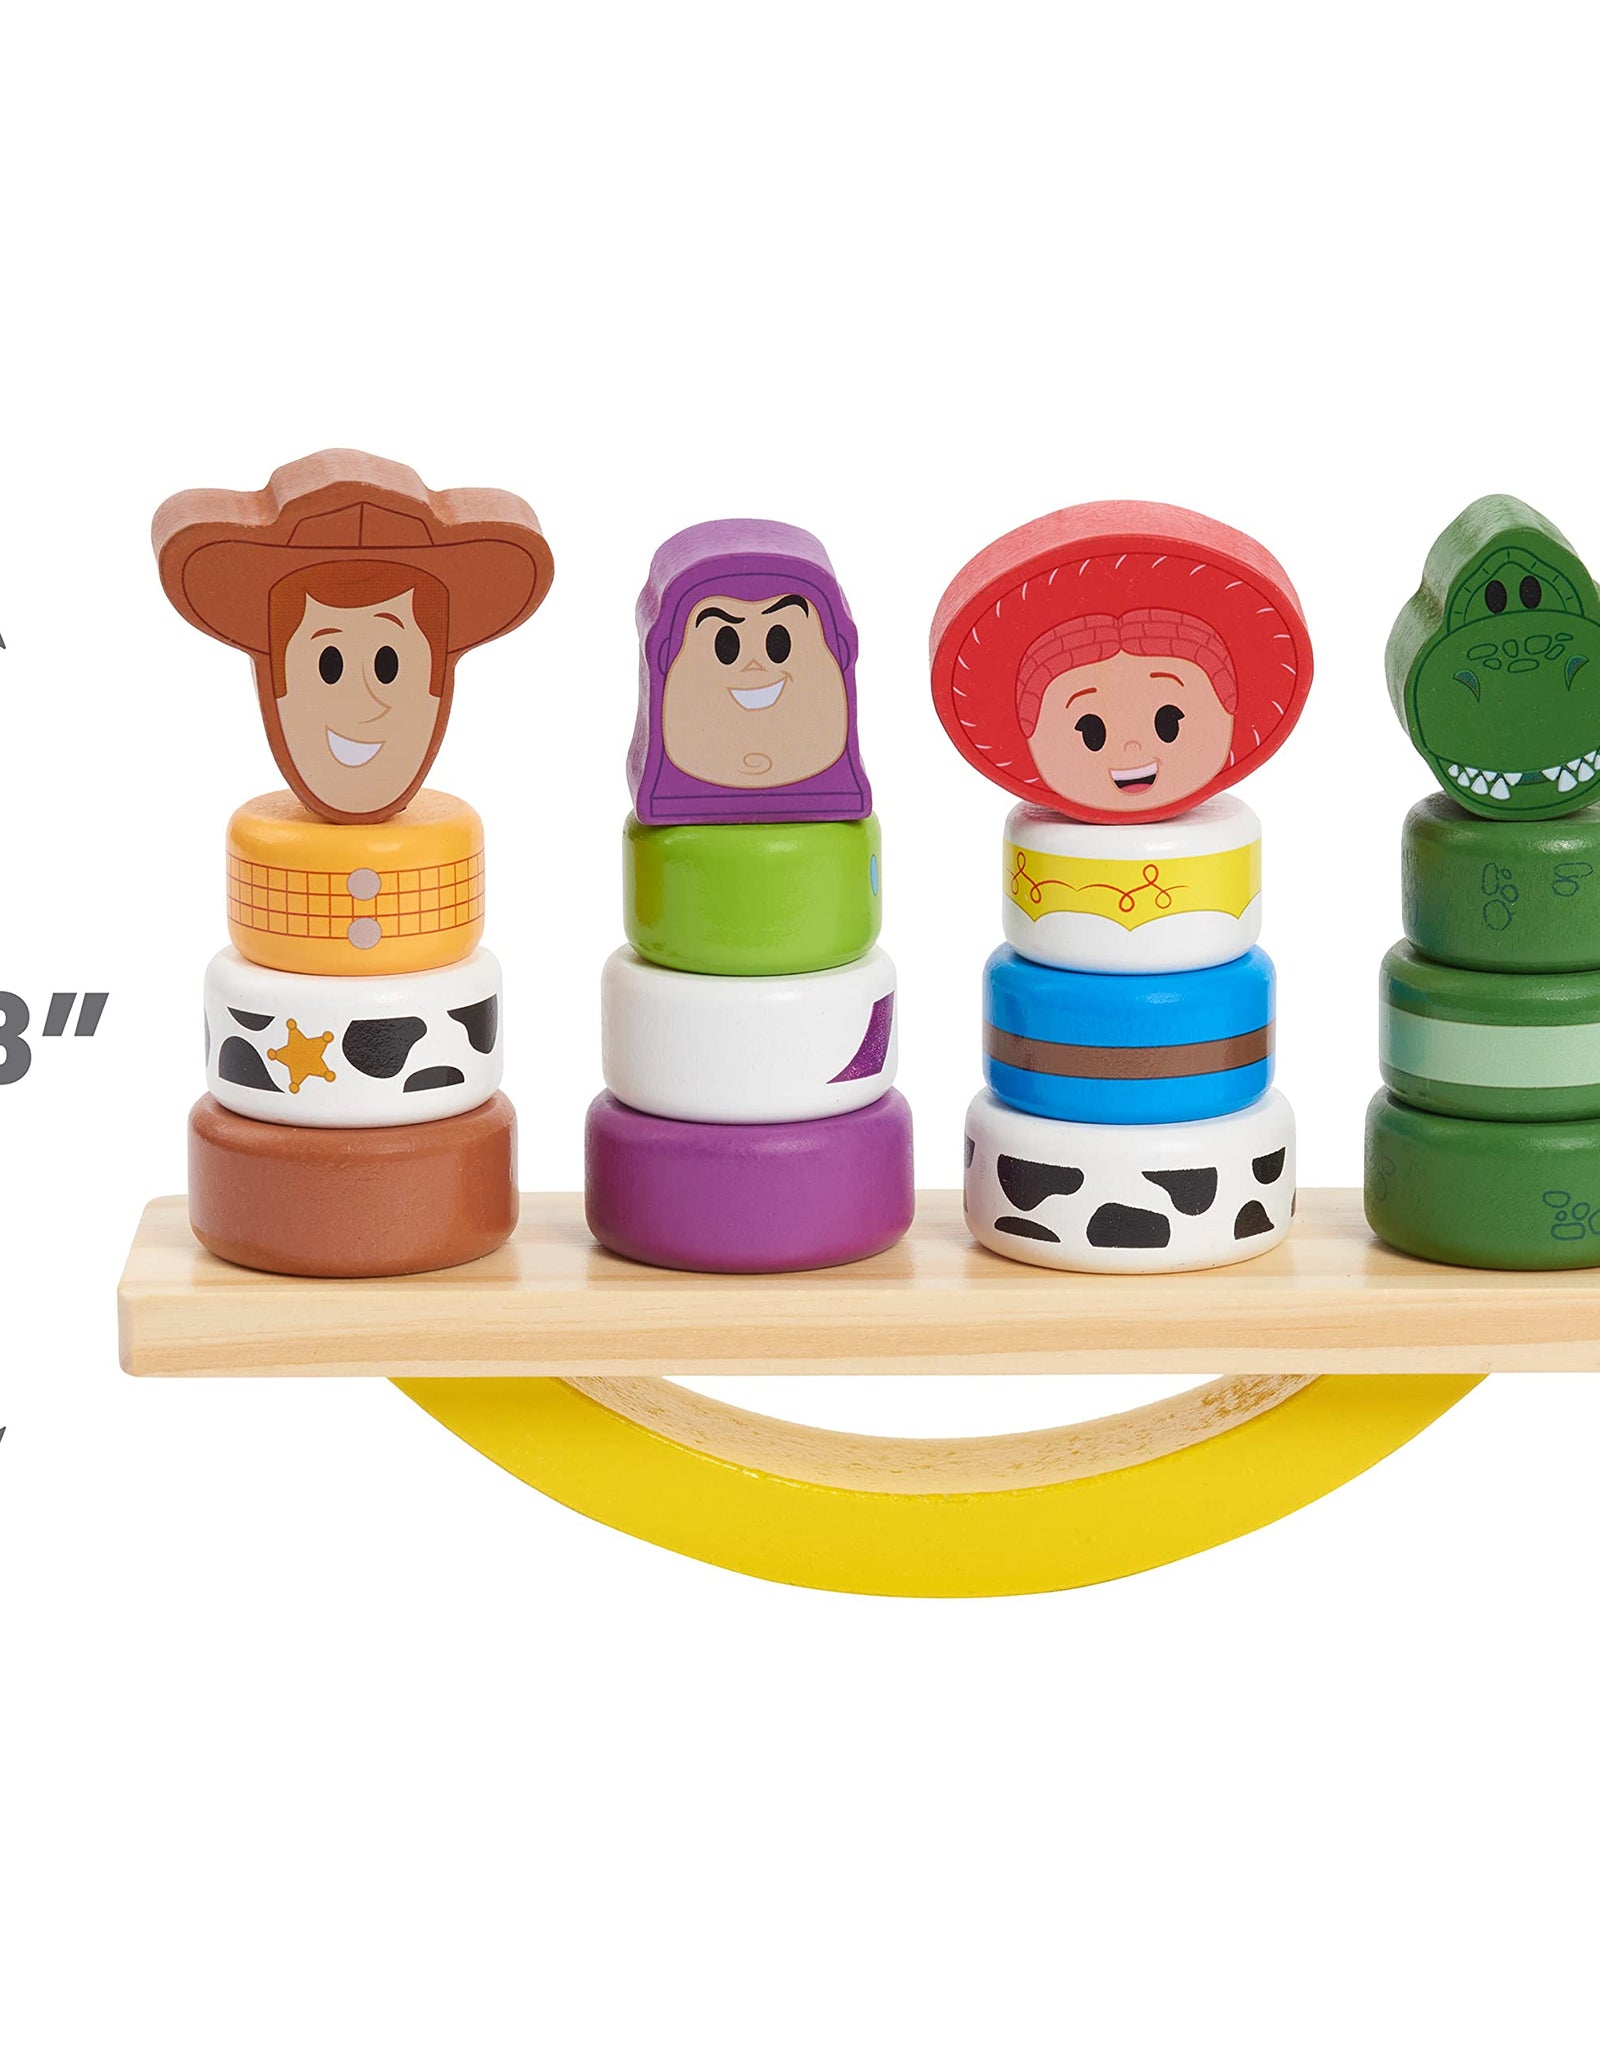 Disney Wooden Toys Toy Story Balance Blocks, 17-Piece Set Features Woody, Buzz Lightyear, Jessie, and Rex, Amazon Exclusive, by Just Play